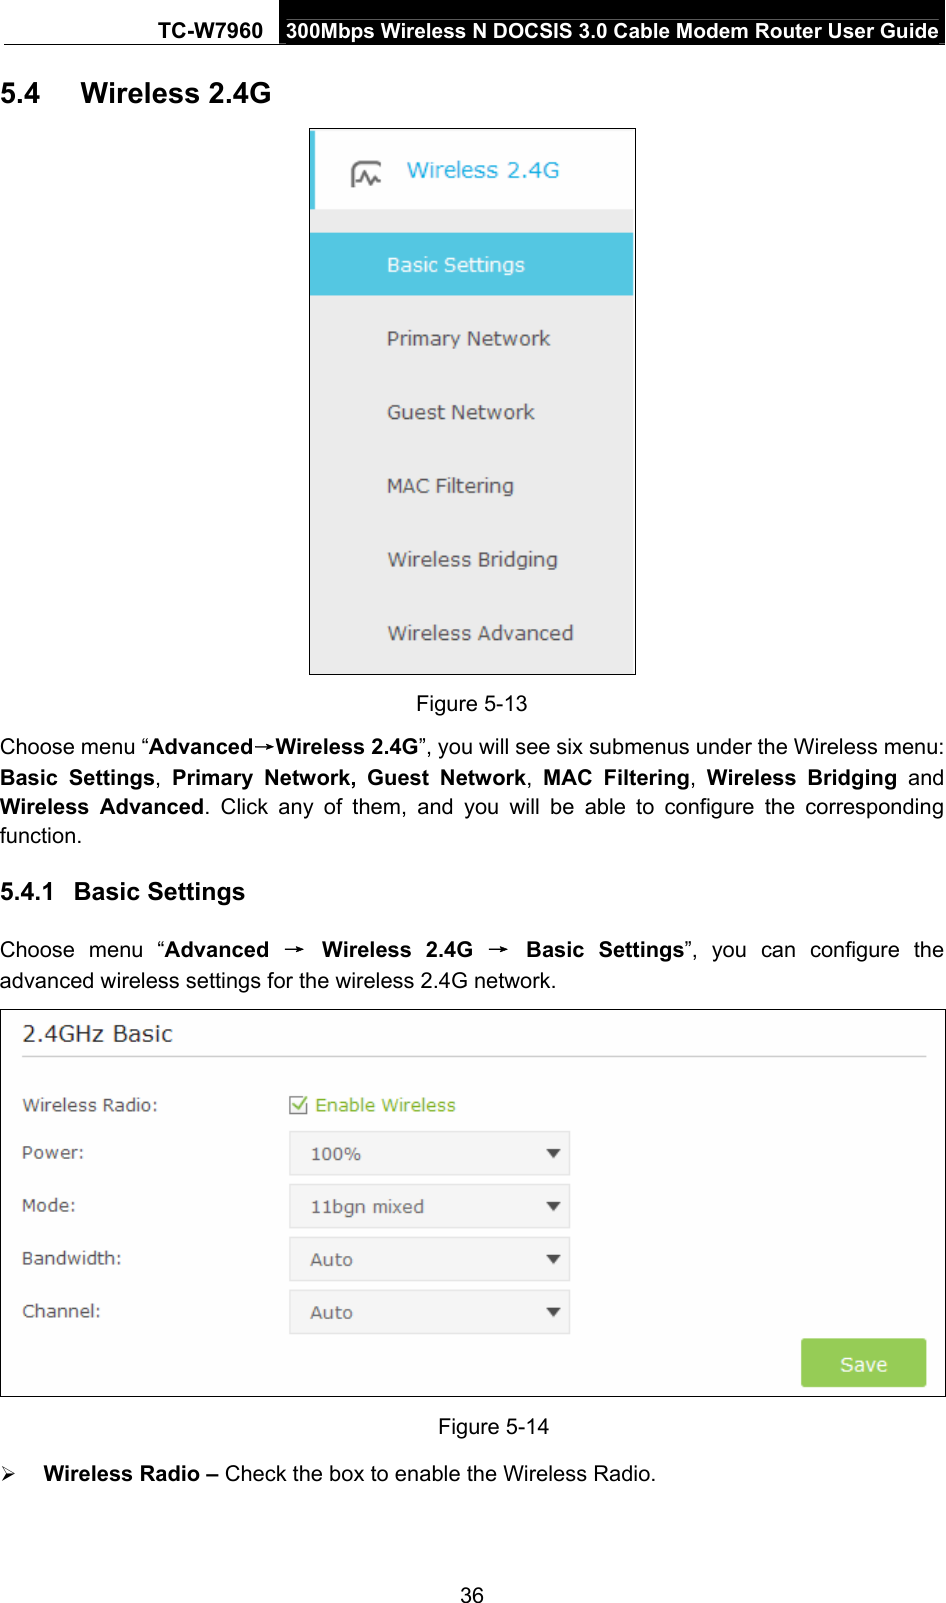 TC-W7960  300Mbps Wireless N DOCSIS 3.0 Cable Modem Router User Guide 5.4  Wireless 2.4G  Figure 5-13 Choose menu “Advanced→Wireless 2.4G”, you will see six submenus under the Wireless menu: Basic Settings,  Primary Network, Guest Network,  MAC Filtering,  Wireless Bridging and Wireless Advanced. Click any of them, and you will be able to configure the corresponding function. 5.4.1  Basic Settings Choose menu “Advanced  → Wireless 2.4G → Basic Settings”, you can configure the advanced wireless settings for the wireless 2.4G network.  Figure 5-14  Wireless Radio – Check the box to enable the Wireless Radio. 36 